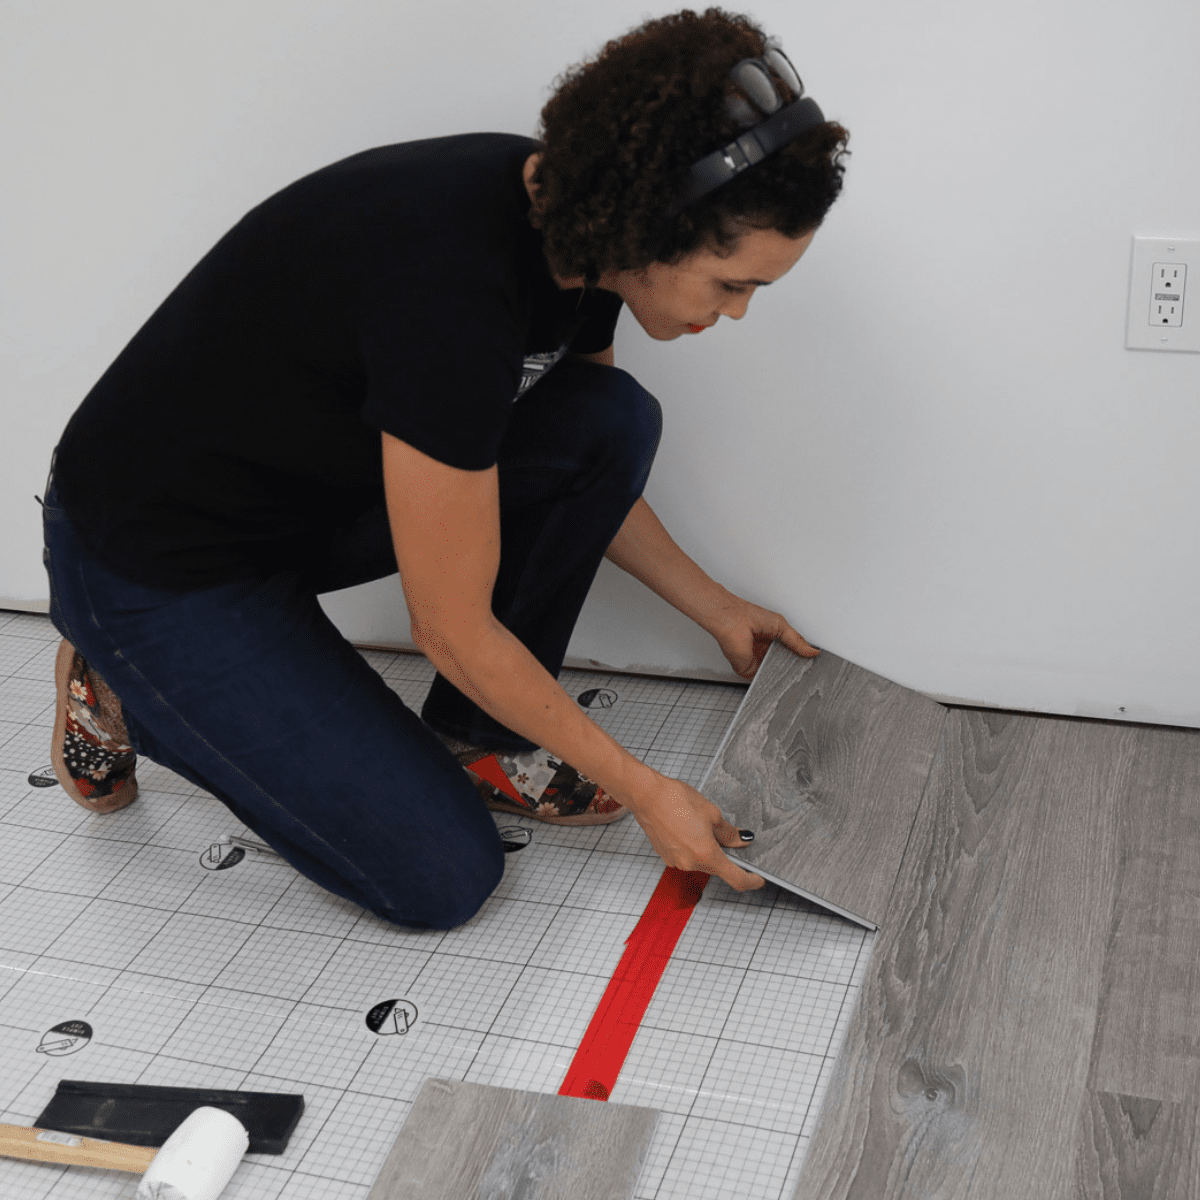 How to Install Vinyl Plank Flooring and Baseboards in Your Shed